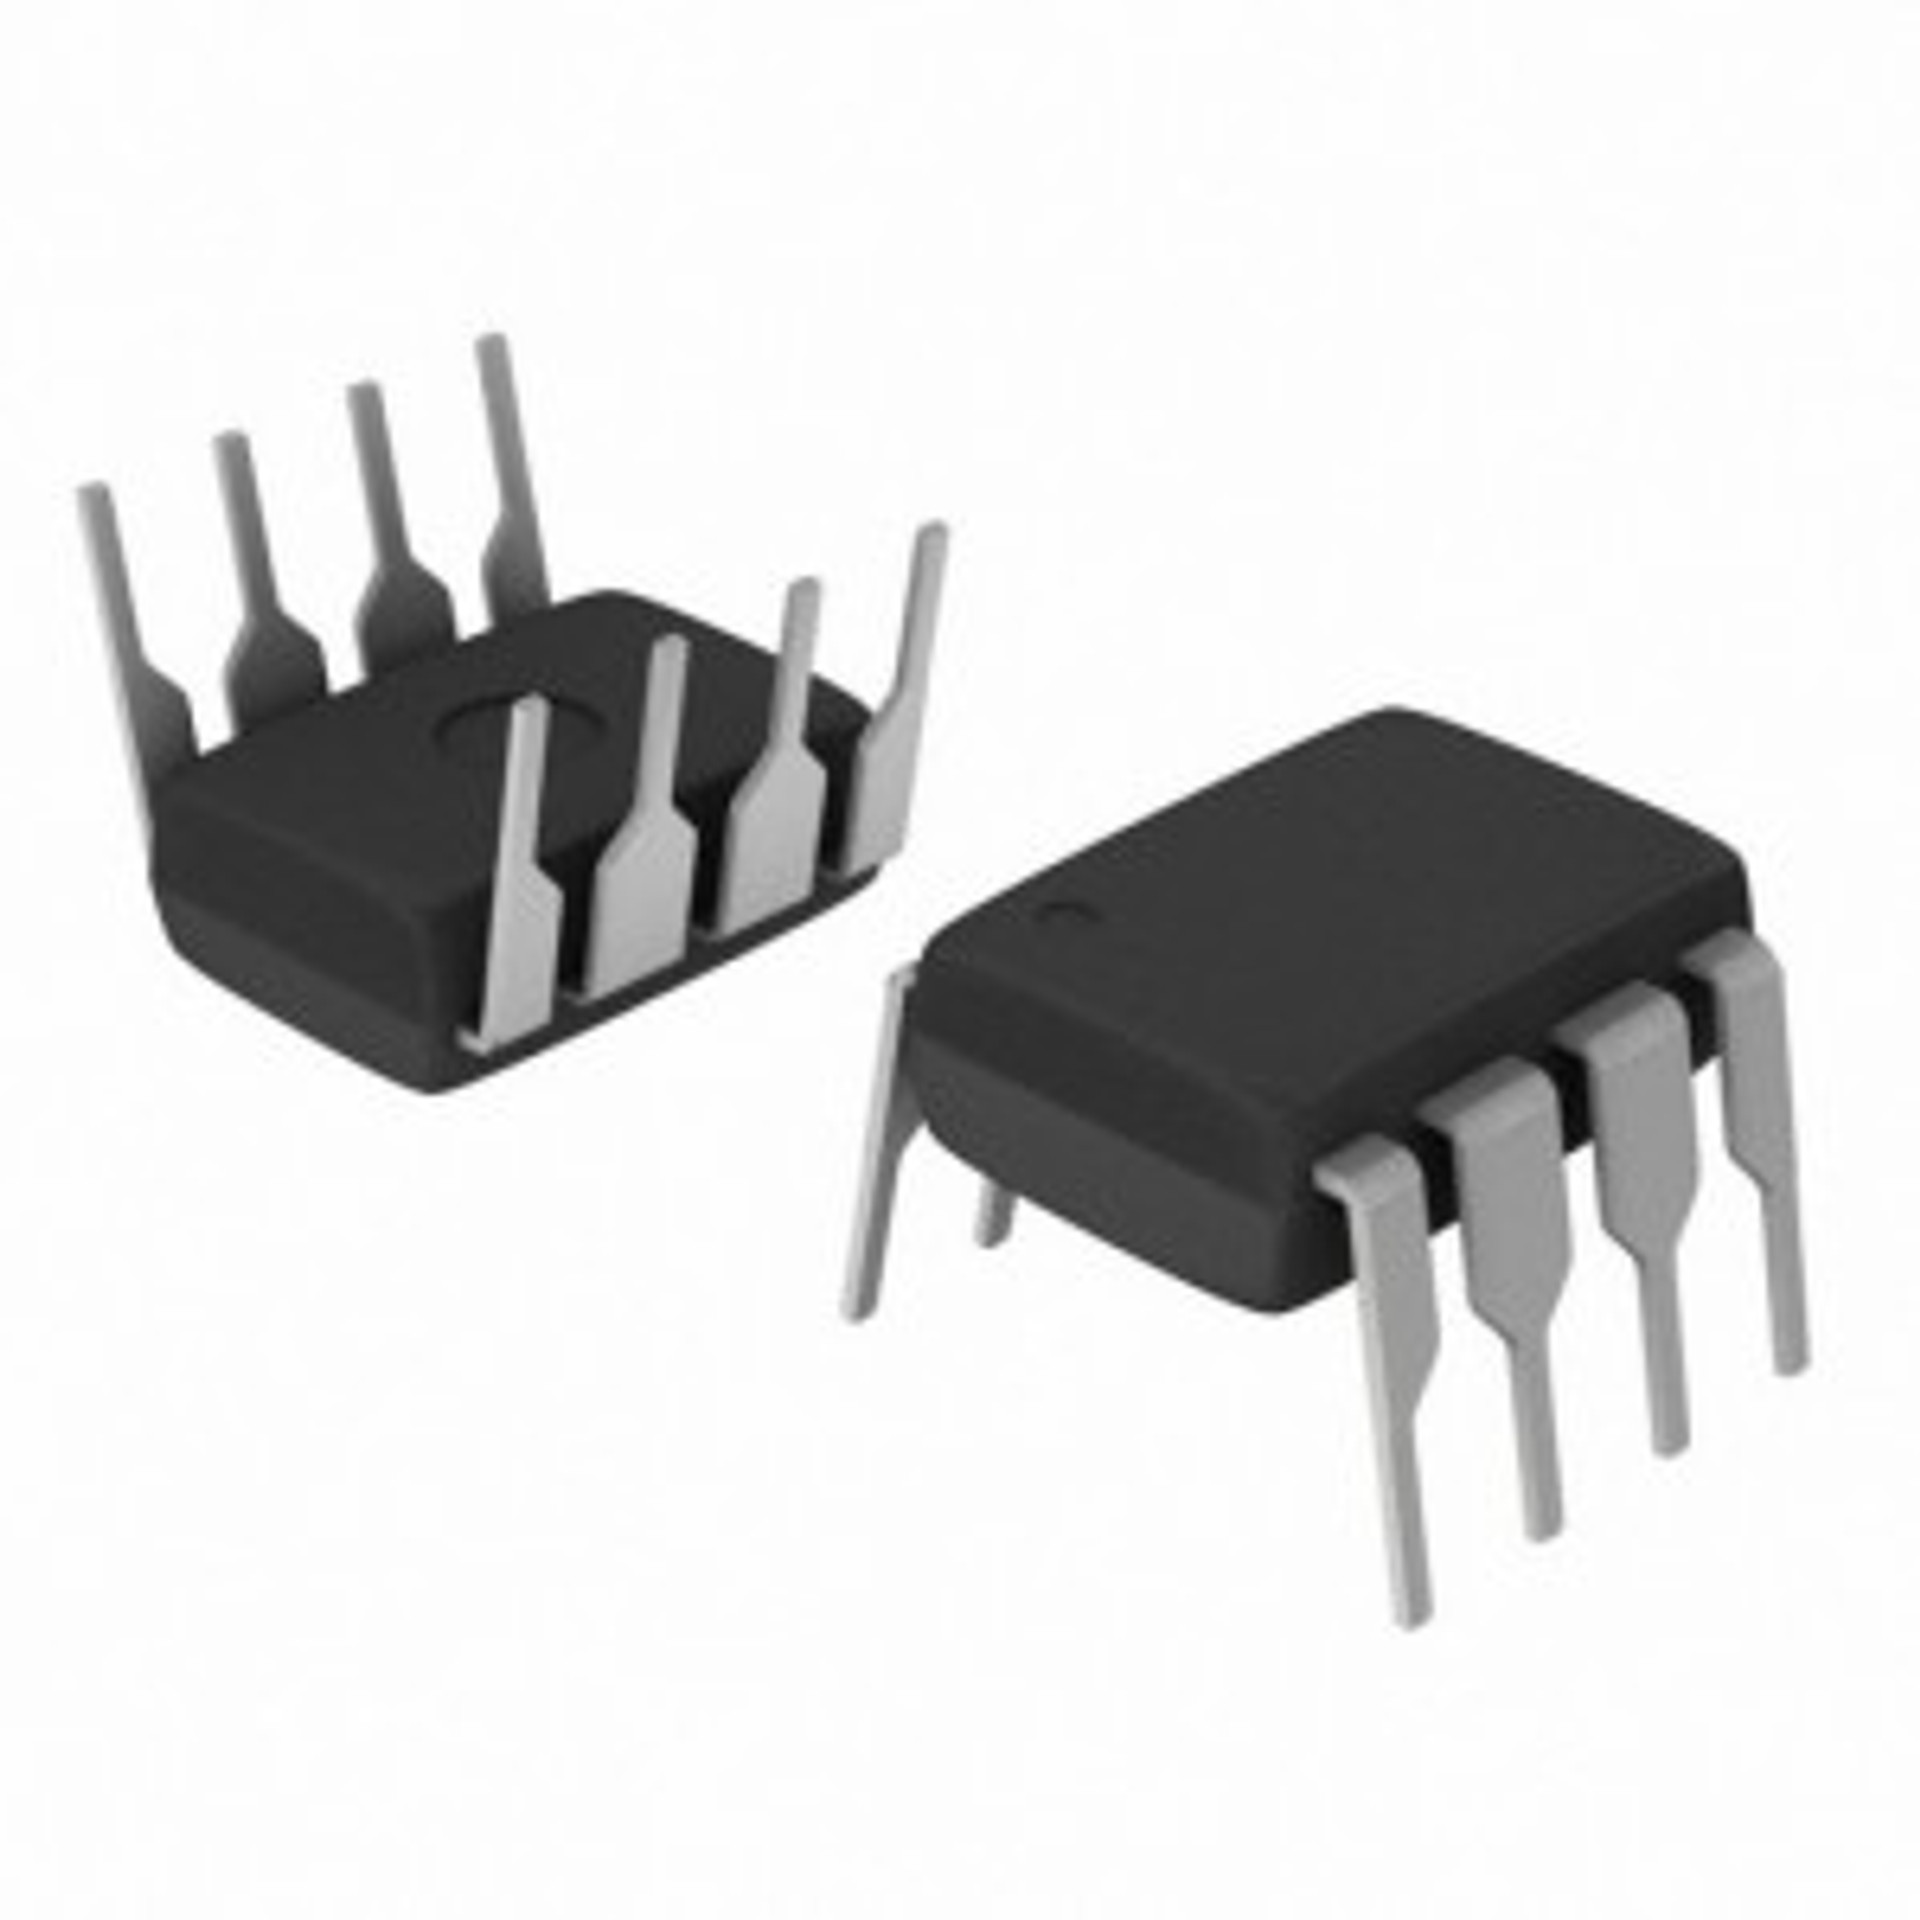 Explore the NE555 IC: A Classic Integrated Circuit